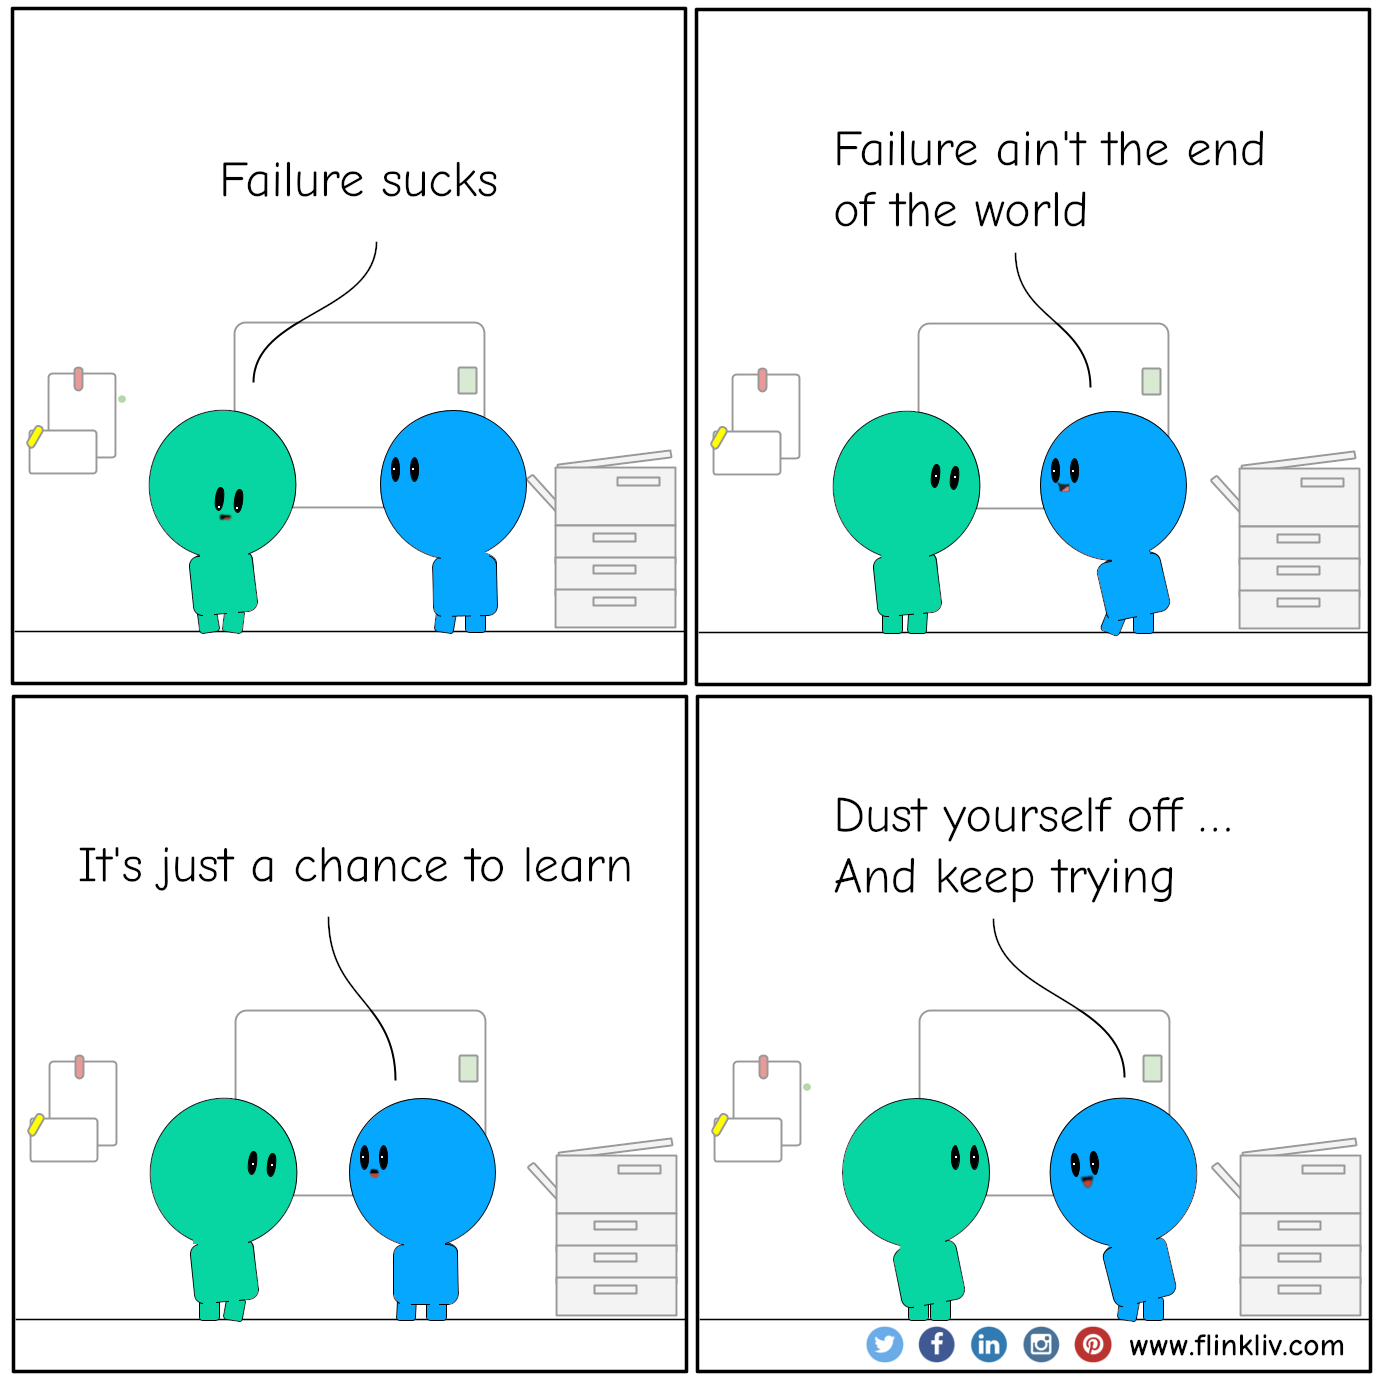 Conversation between A and B about learning from failure
				A: Failure sucks.
				B: Failure ain't the end of the world.
				B: It's just a chance to learn. 
				B: Dust yourself off, and keep trying.
              